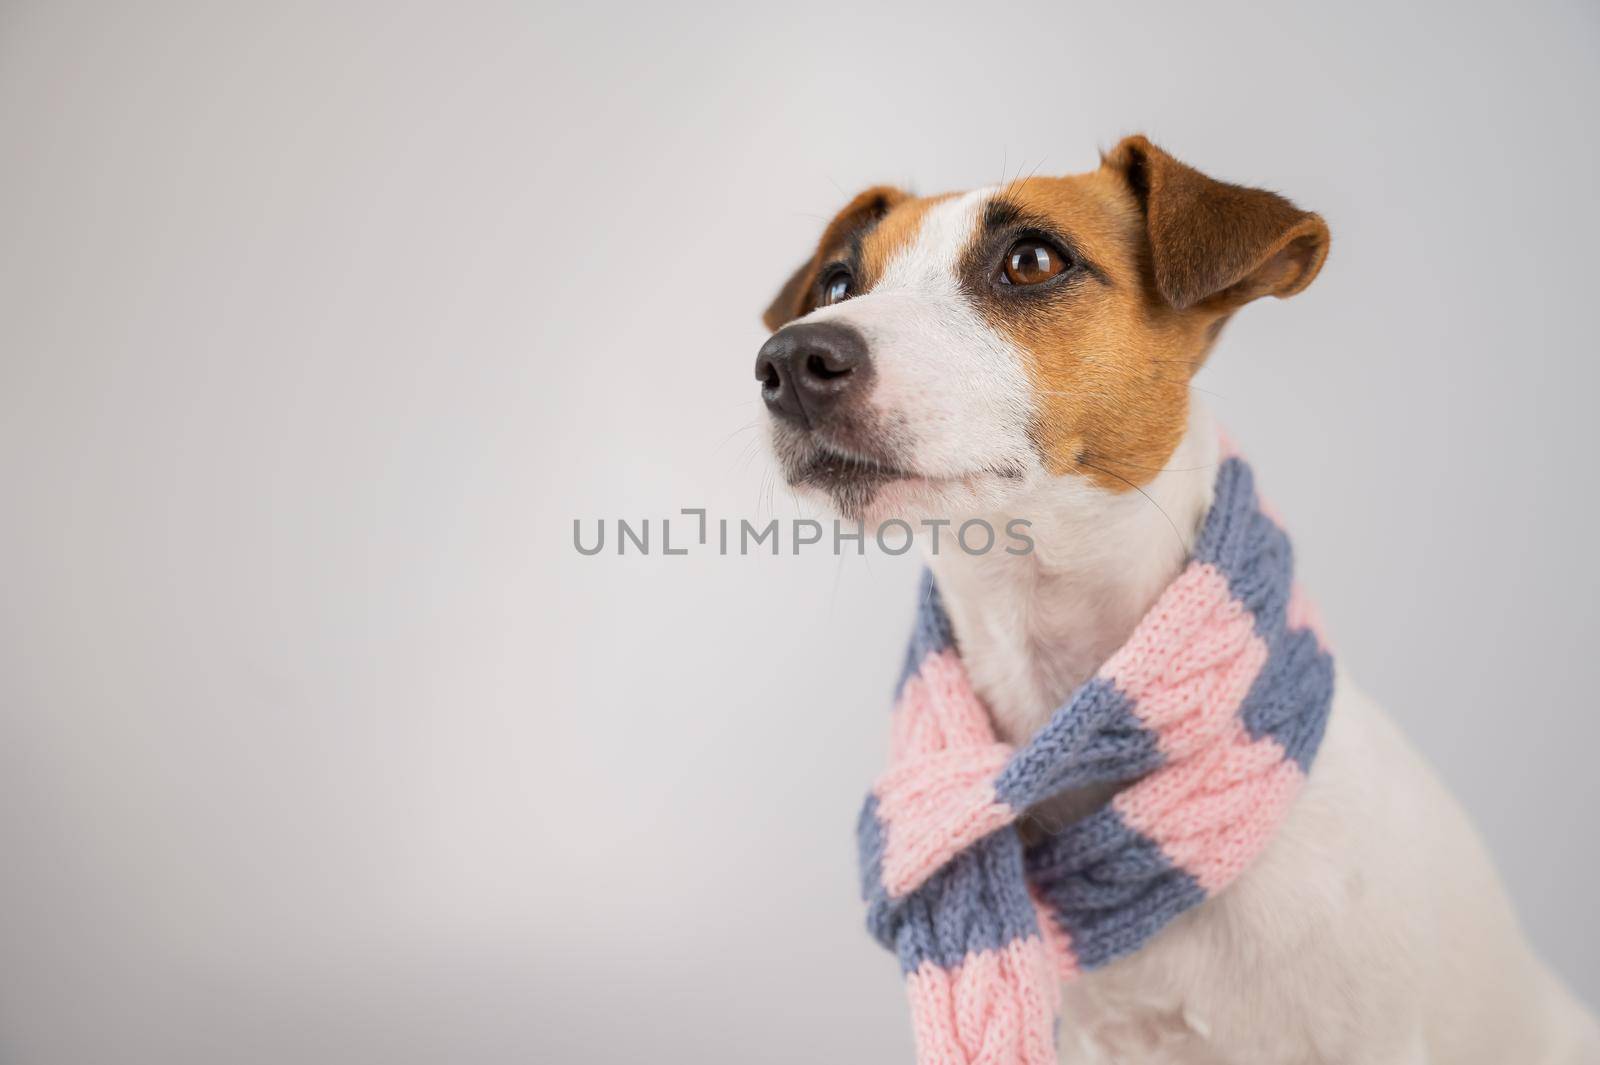 Dog Jack Russell Terrier wearing a knit scarf on a white background. by mrwed54